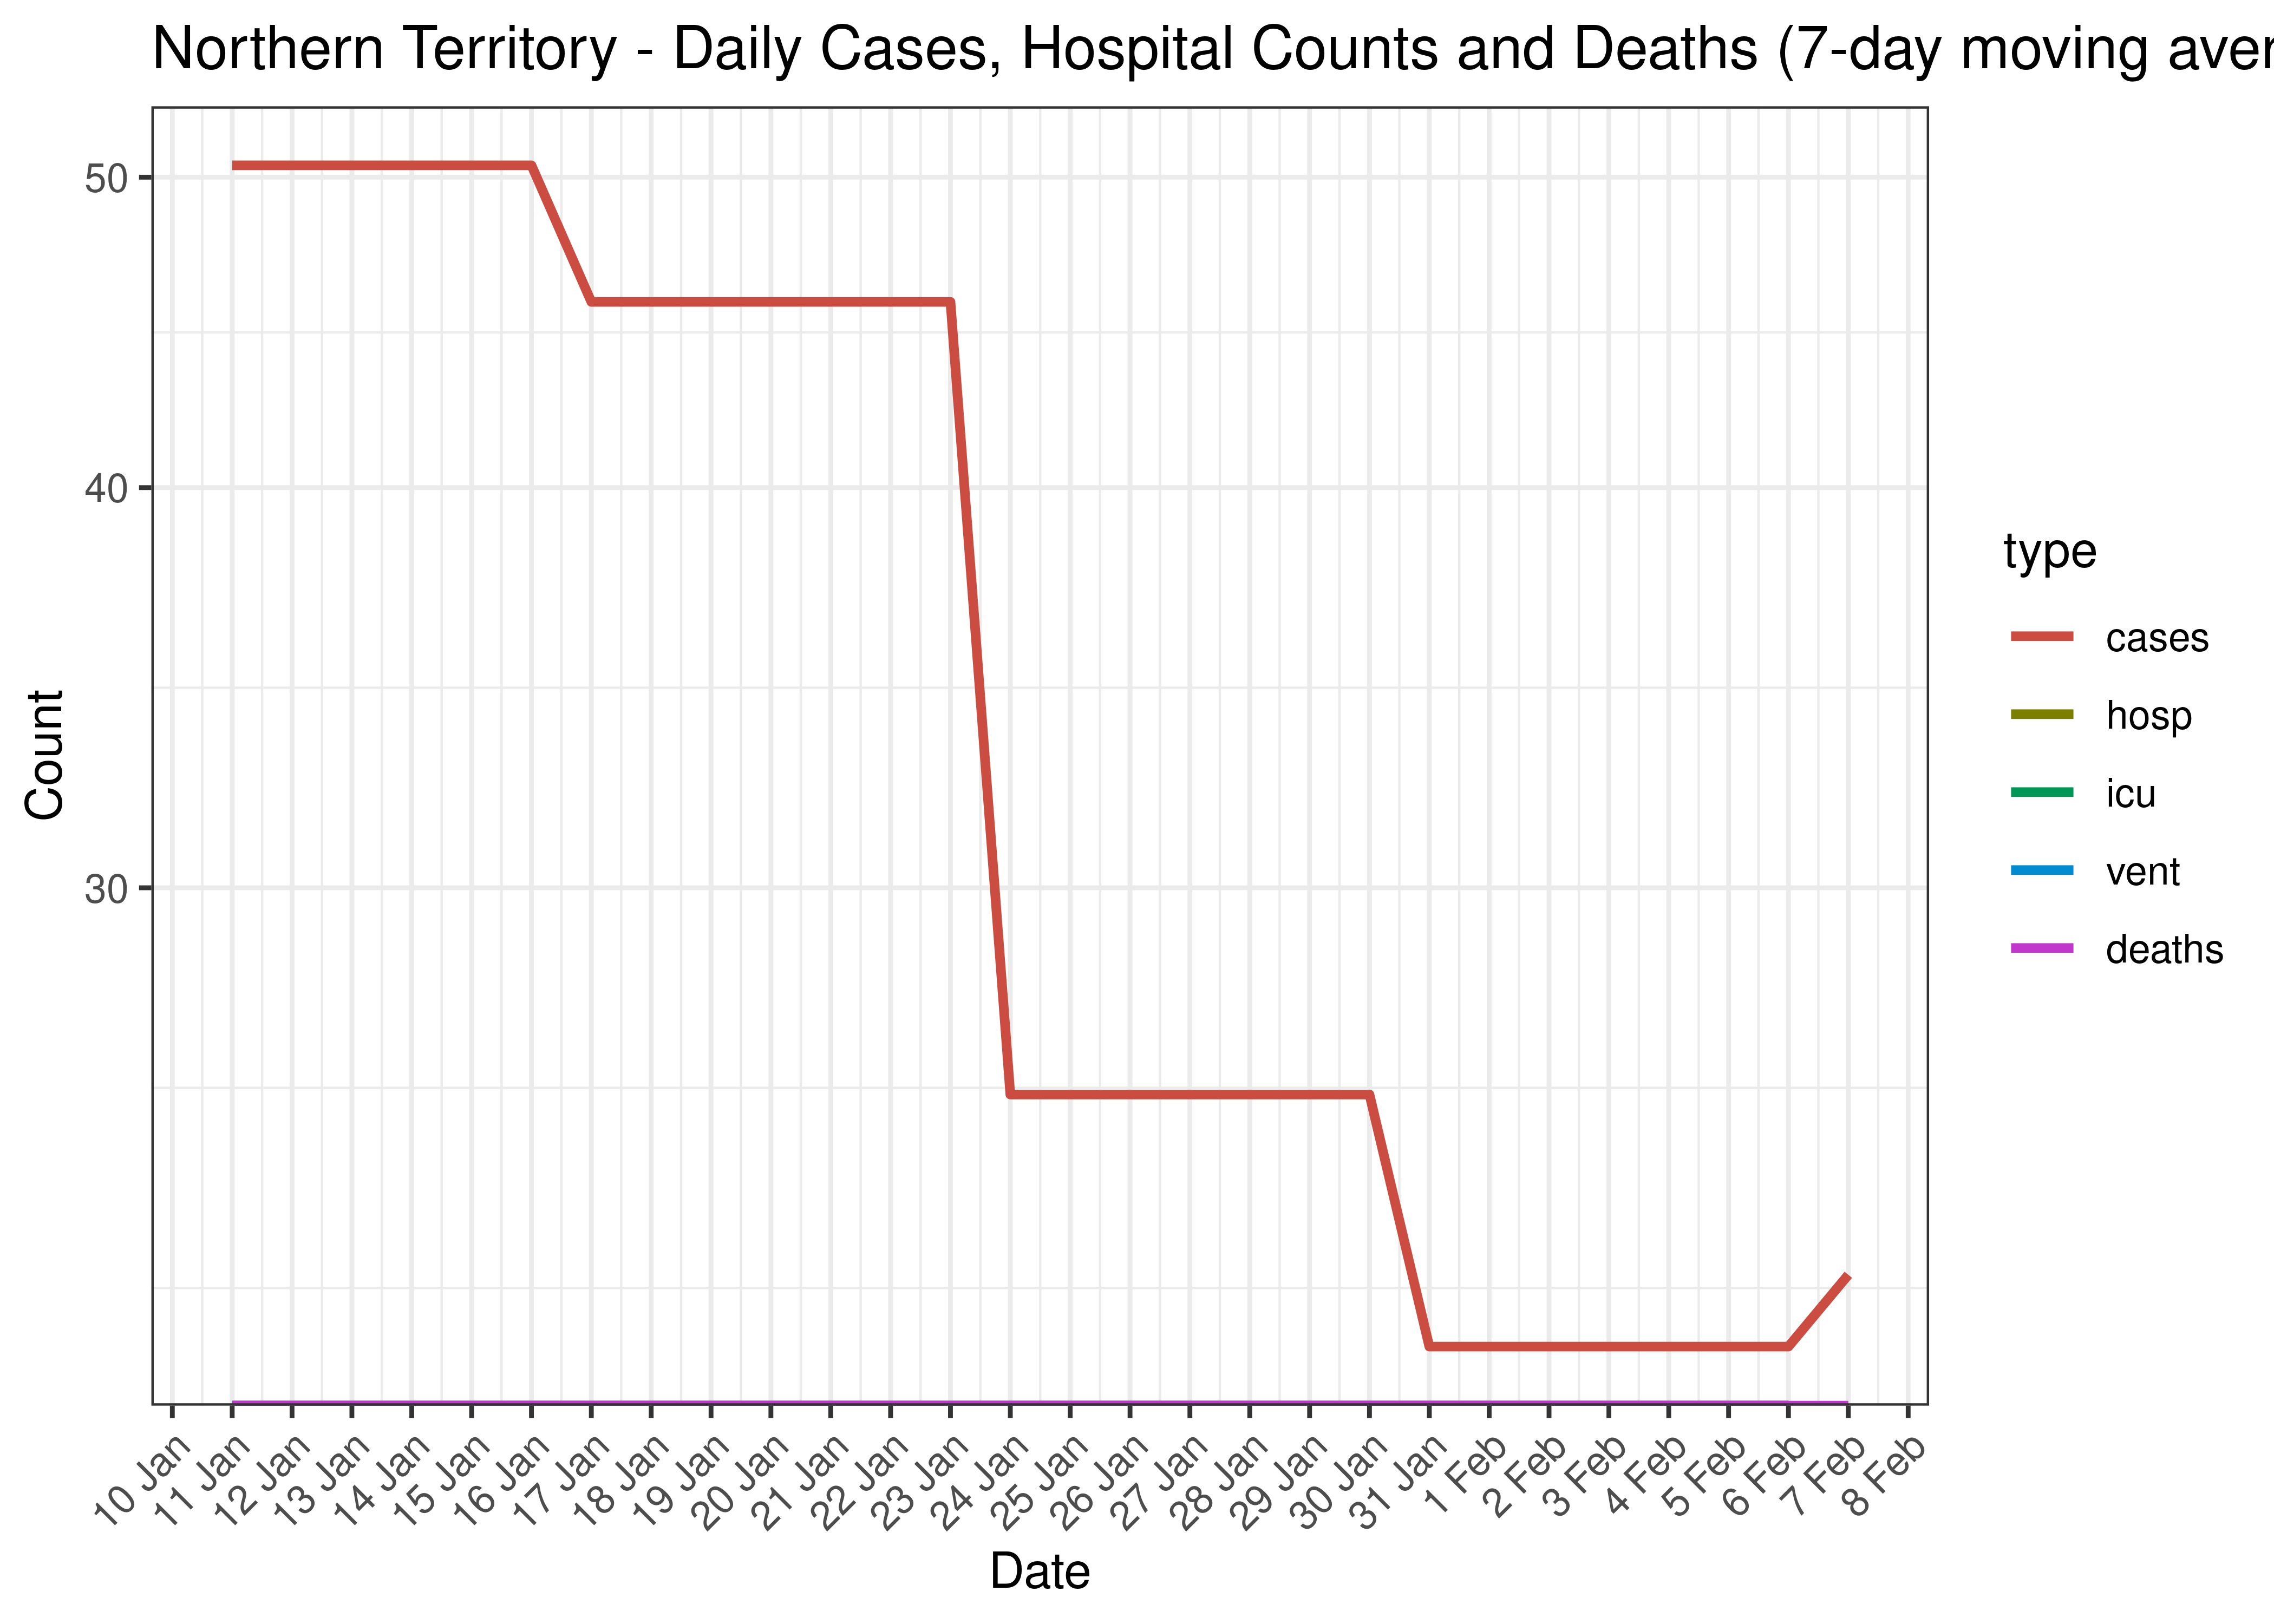 Northern Territory - Daily Cases, Admissions and Deaths for Last 30-days (7-day moving average)